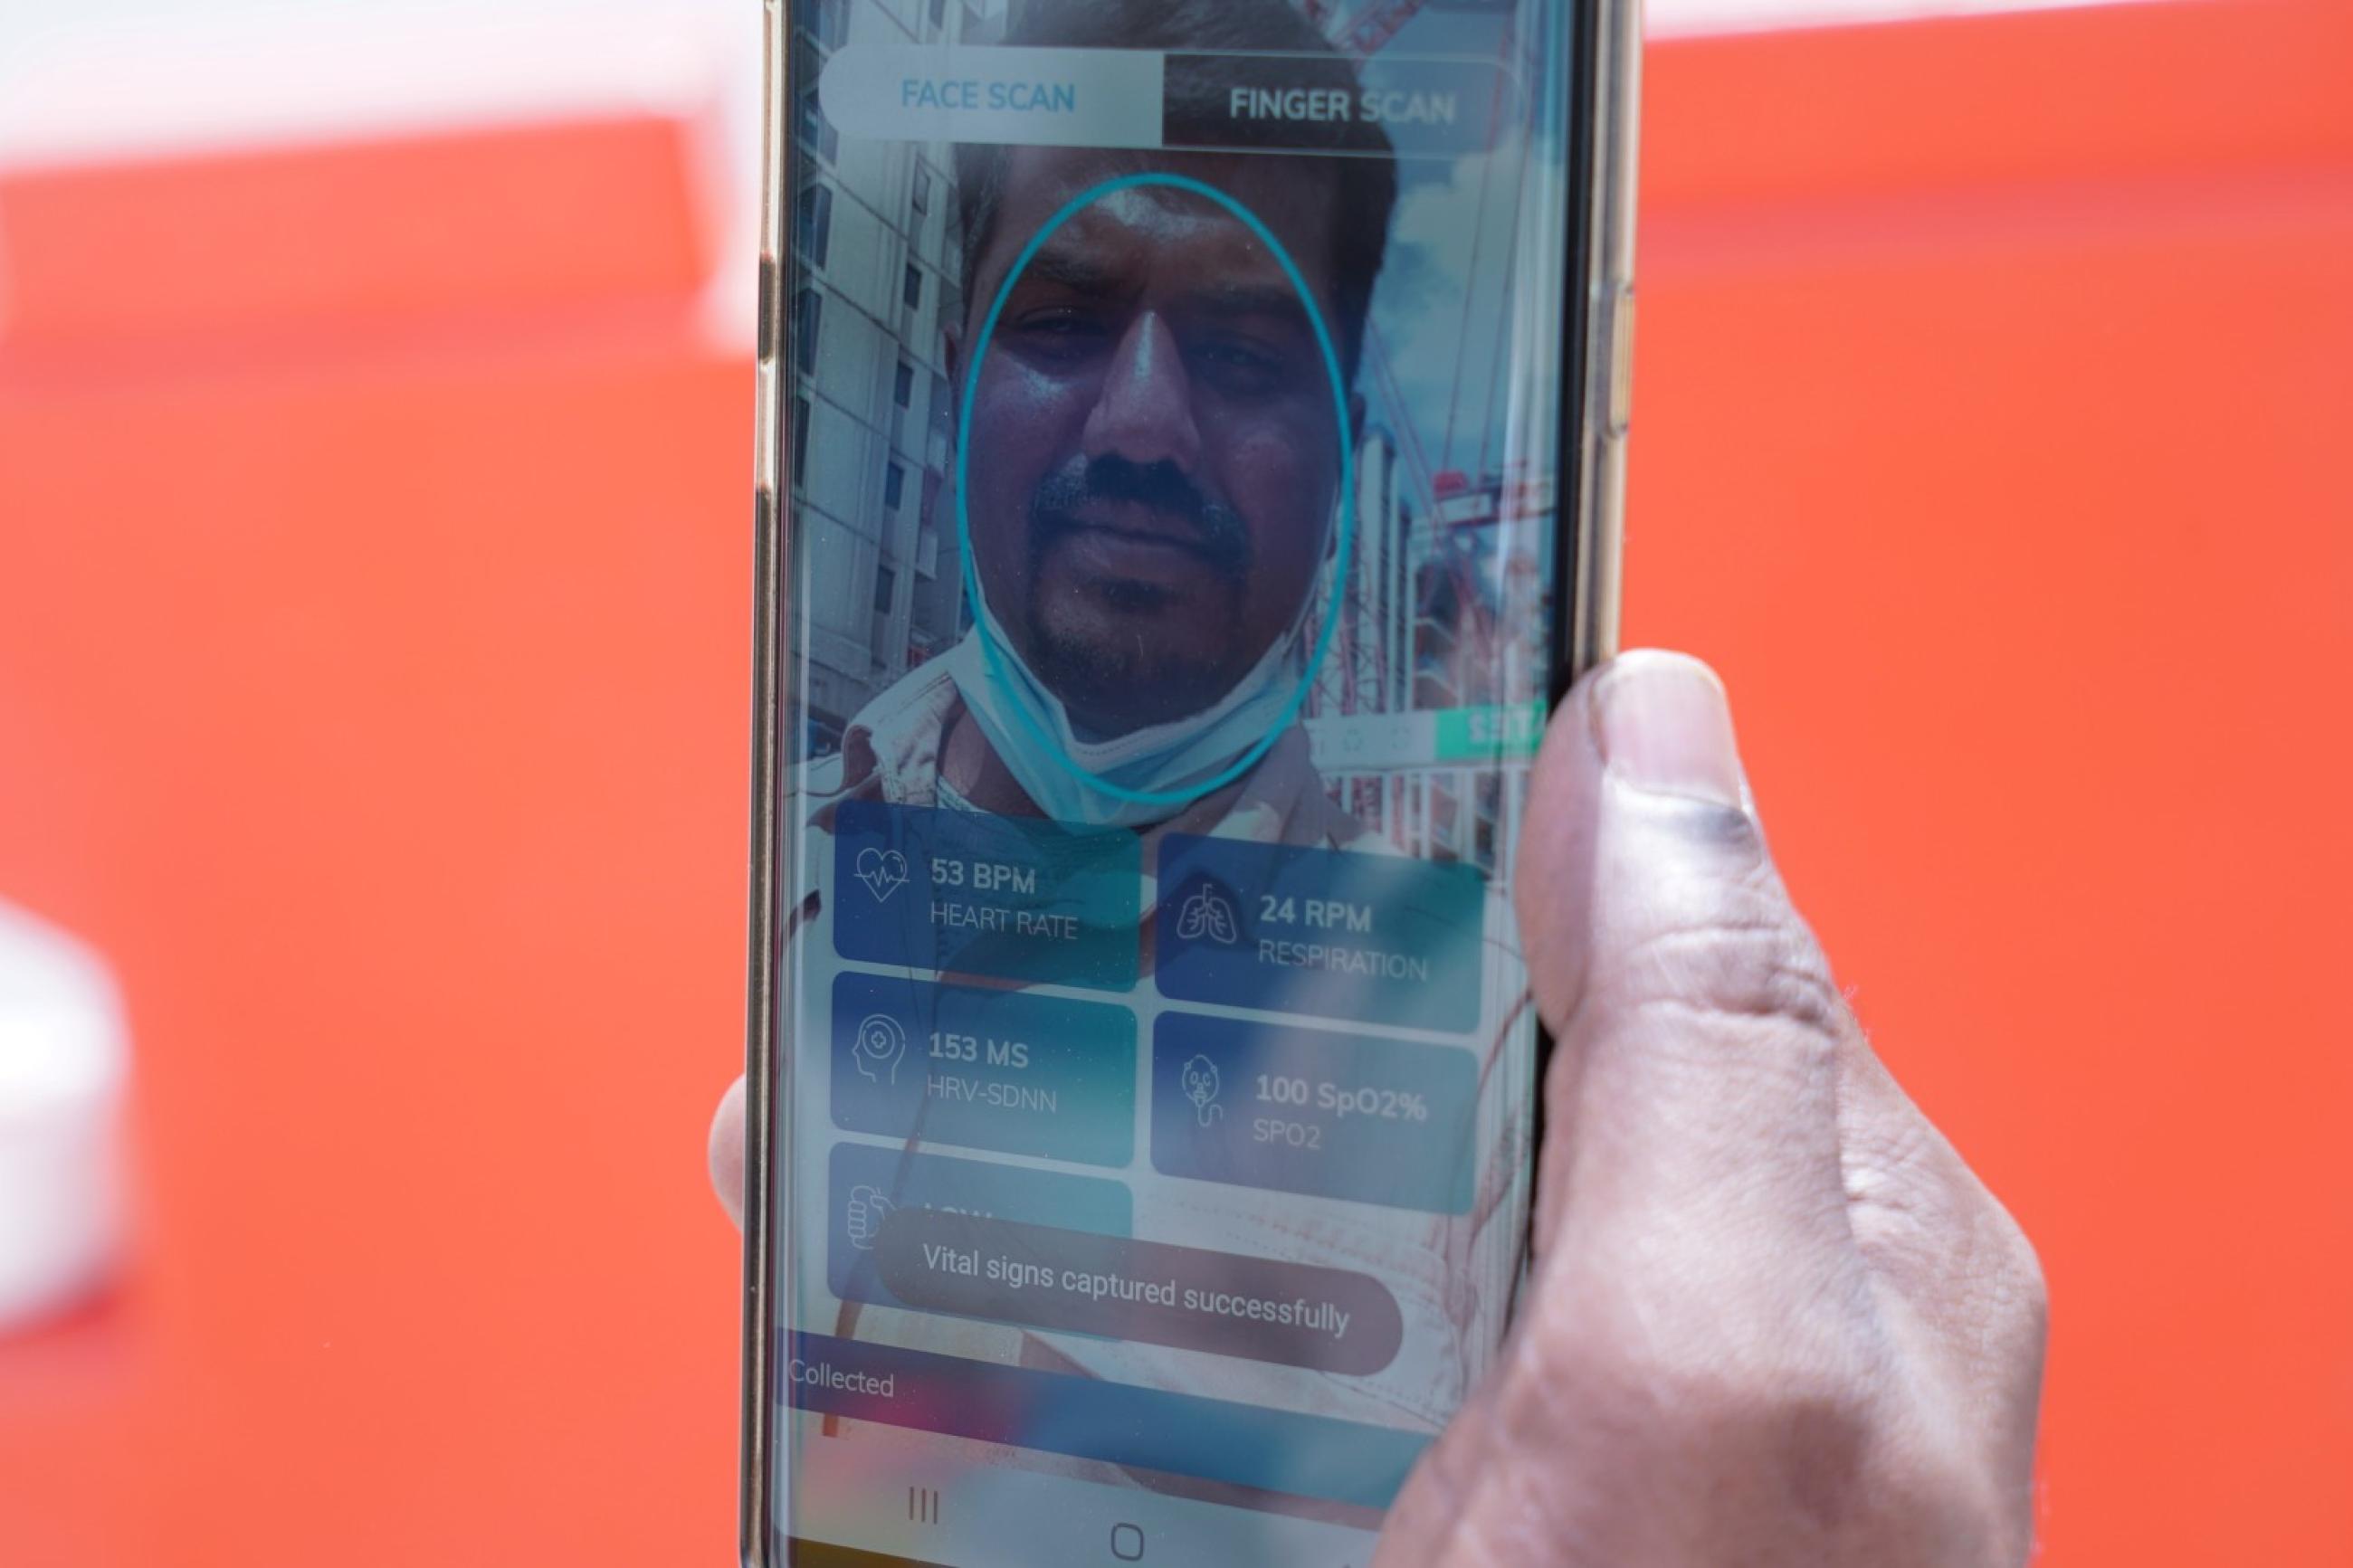 Gunasekar Udayakumar uses the Nervotec app to scan his face and check his vital signs as part of a daily checkup for employees, at a construction site, in central Singapore, on February 19 2021.